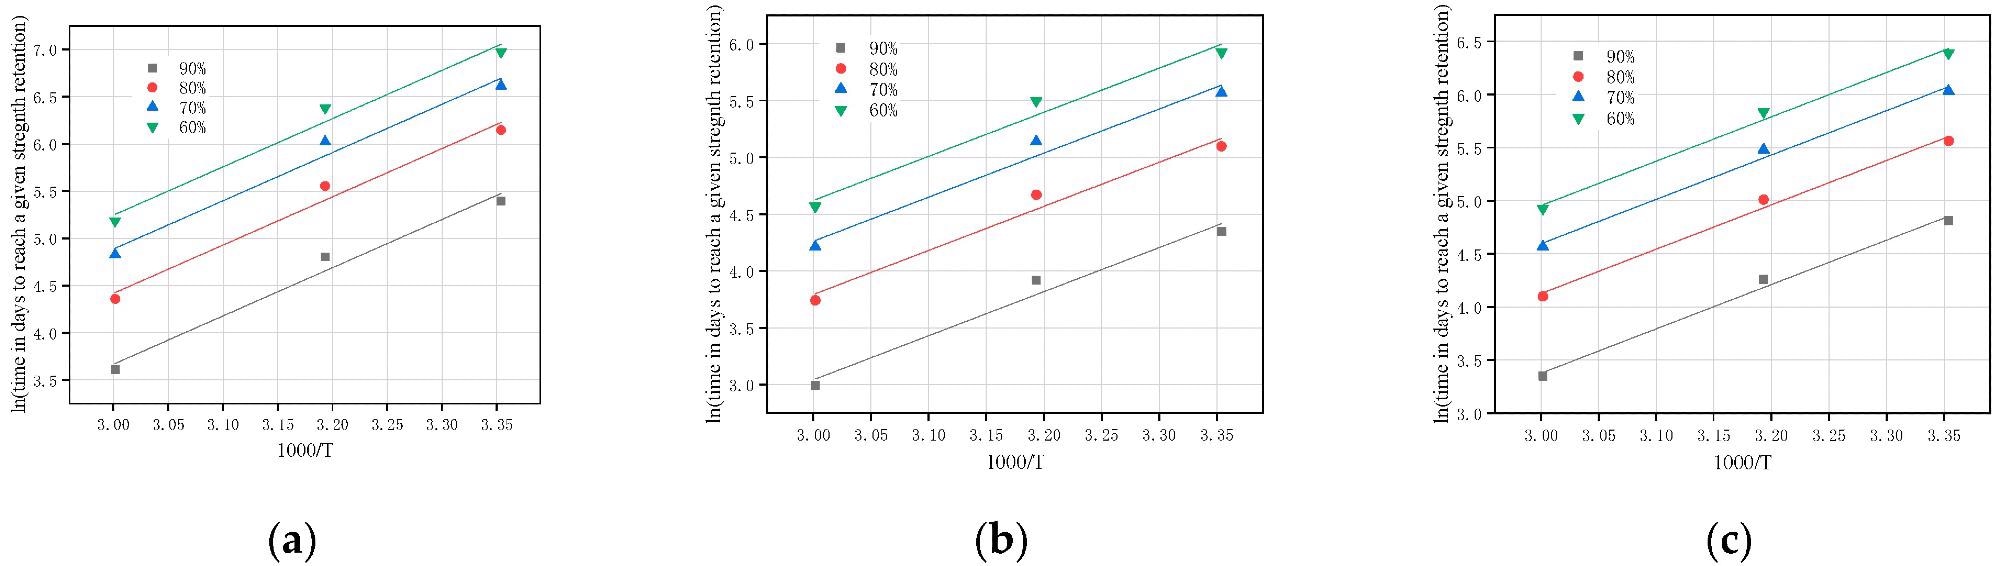 Arrhenius line for durability prediction model of GFRP bars in different environments: (a) SW; (b) SA; and (c) SWC.